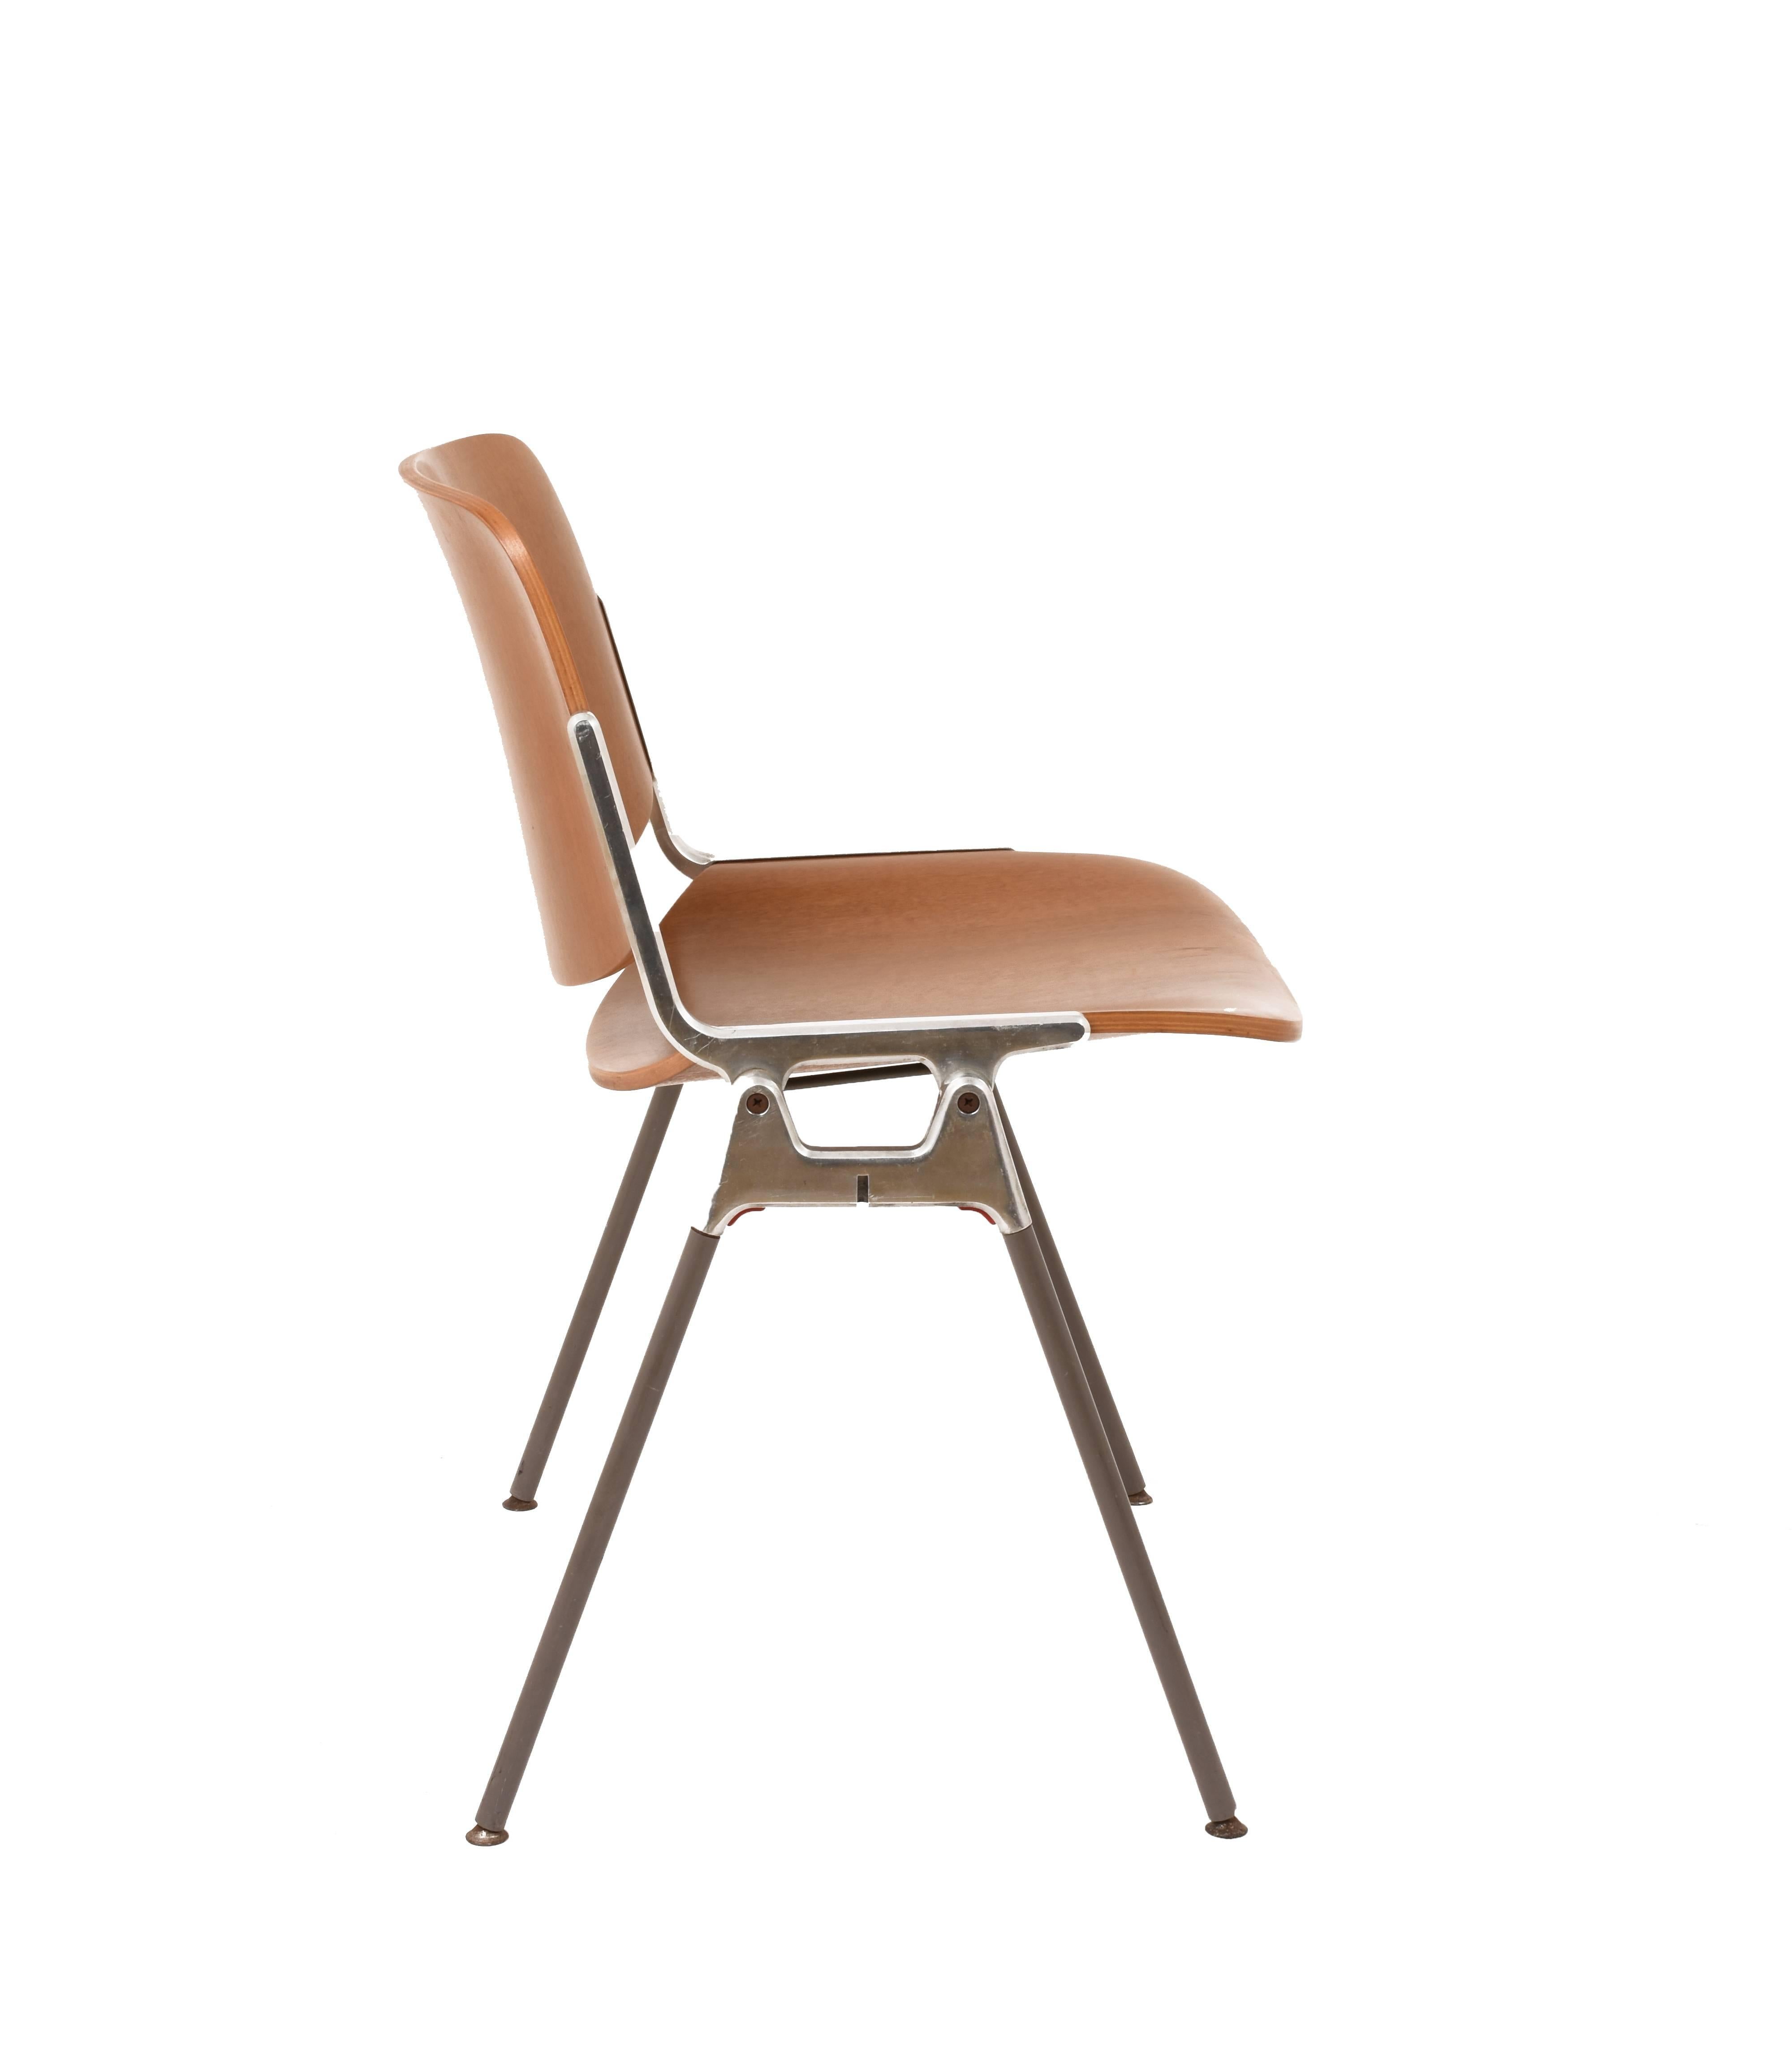 Chair designed by Giancarlo Piretti for Castelli. Wooden seat and back.
Eternal and indestructible chair.